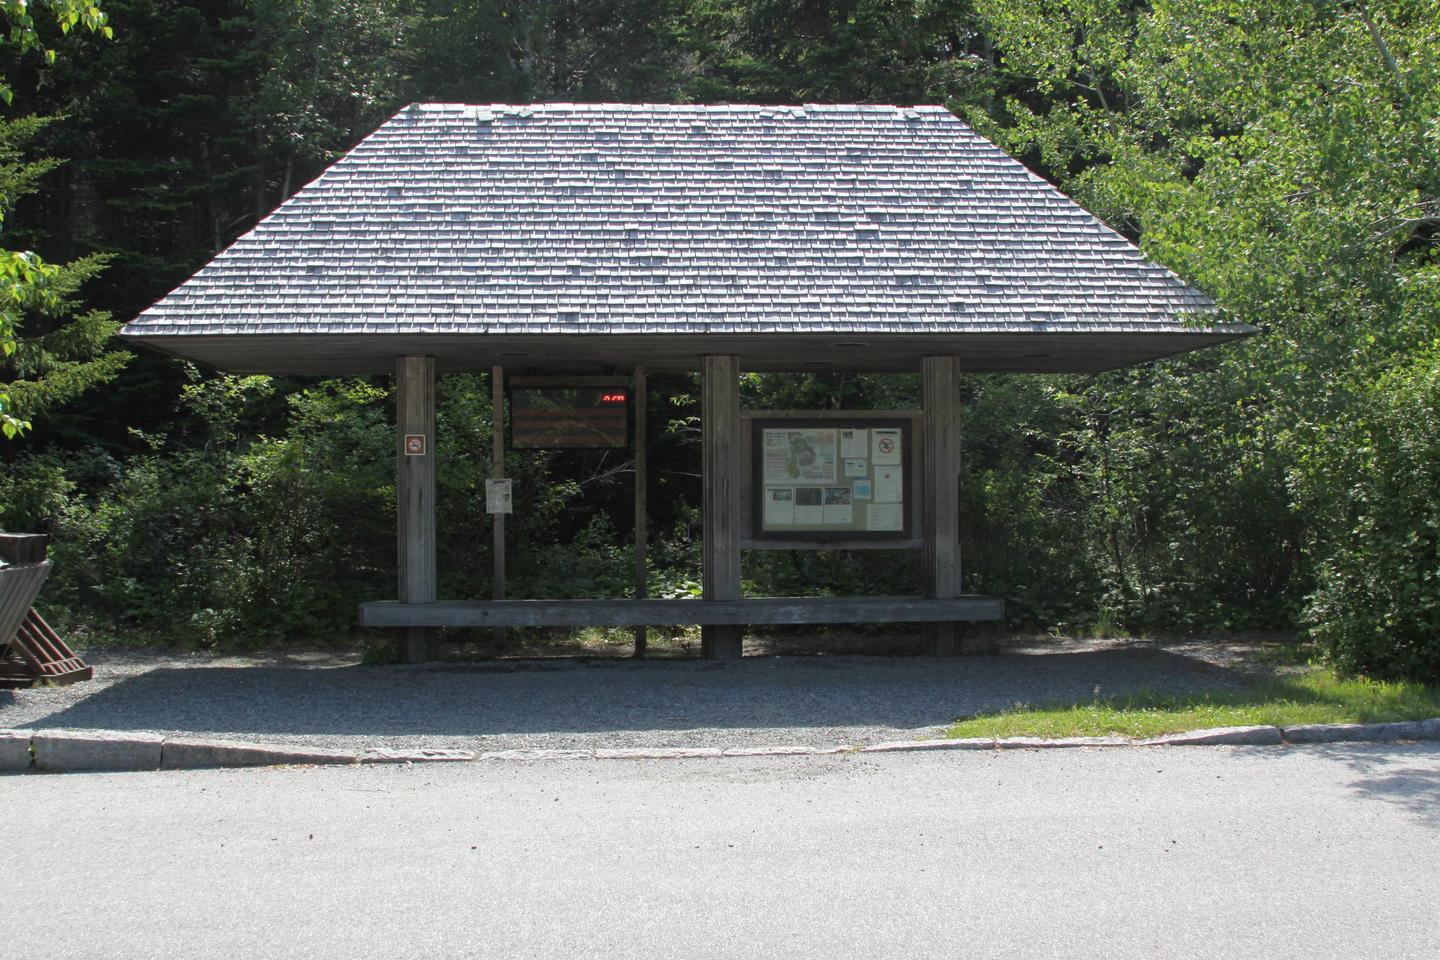 Wooden bus stop shelter